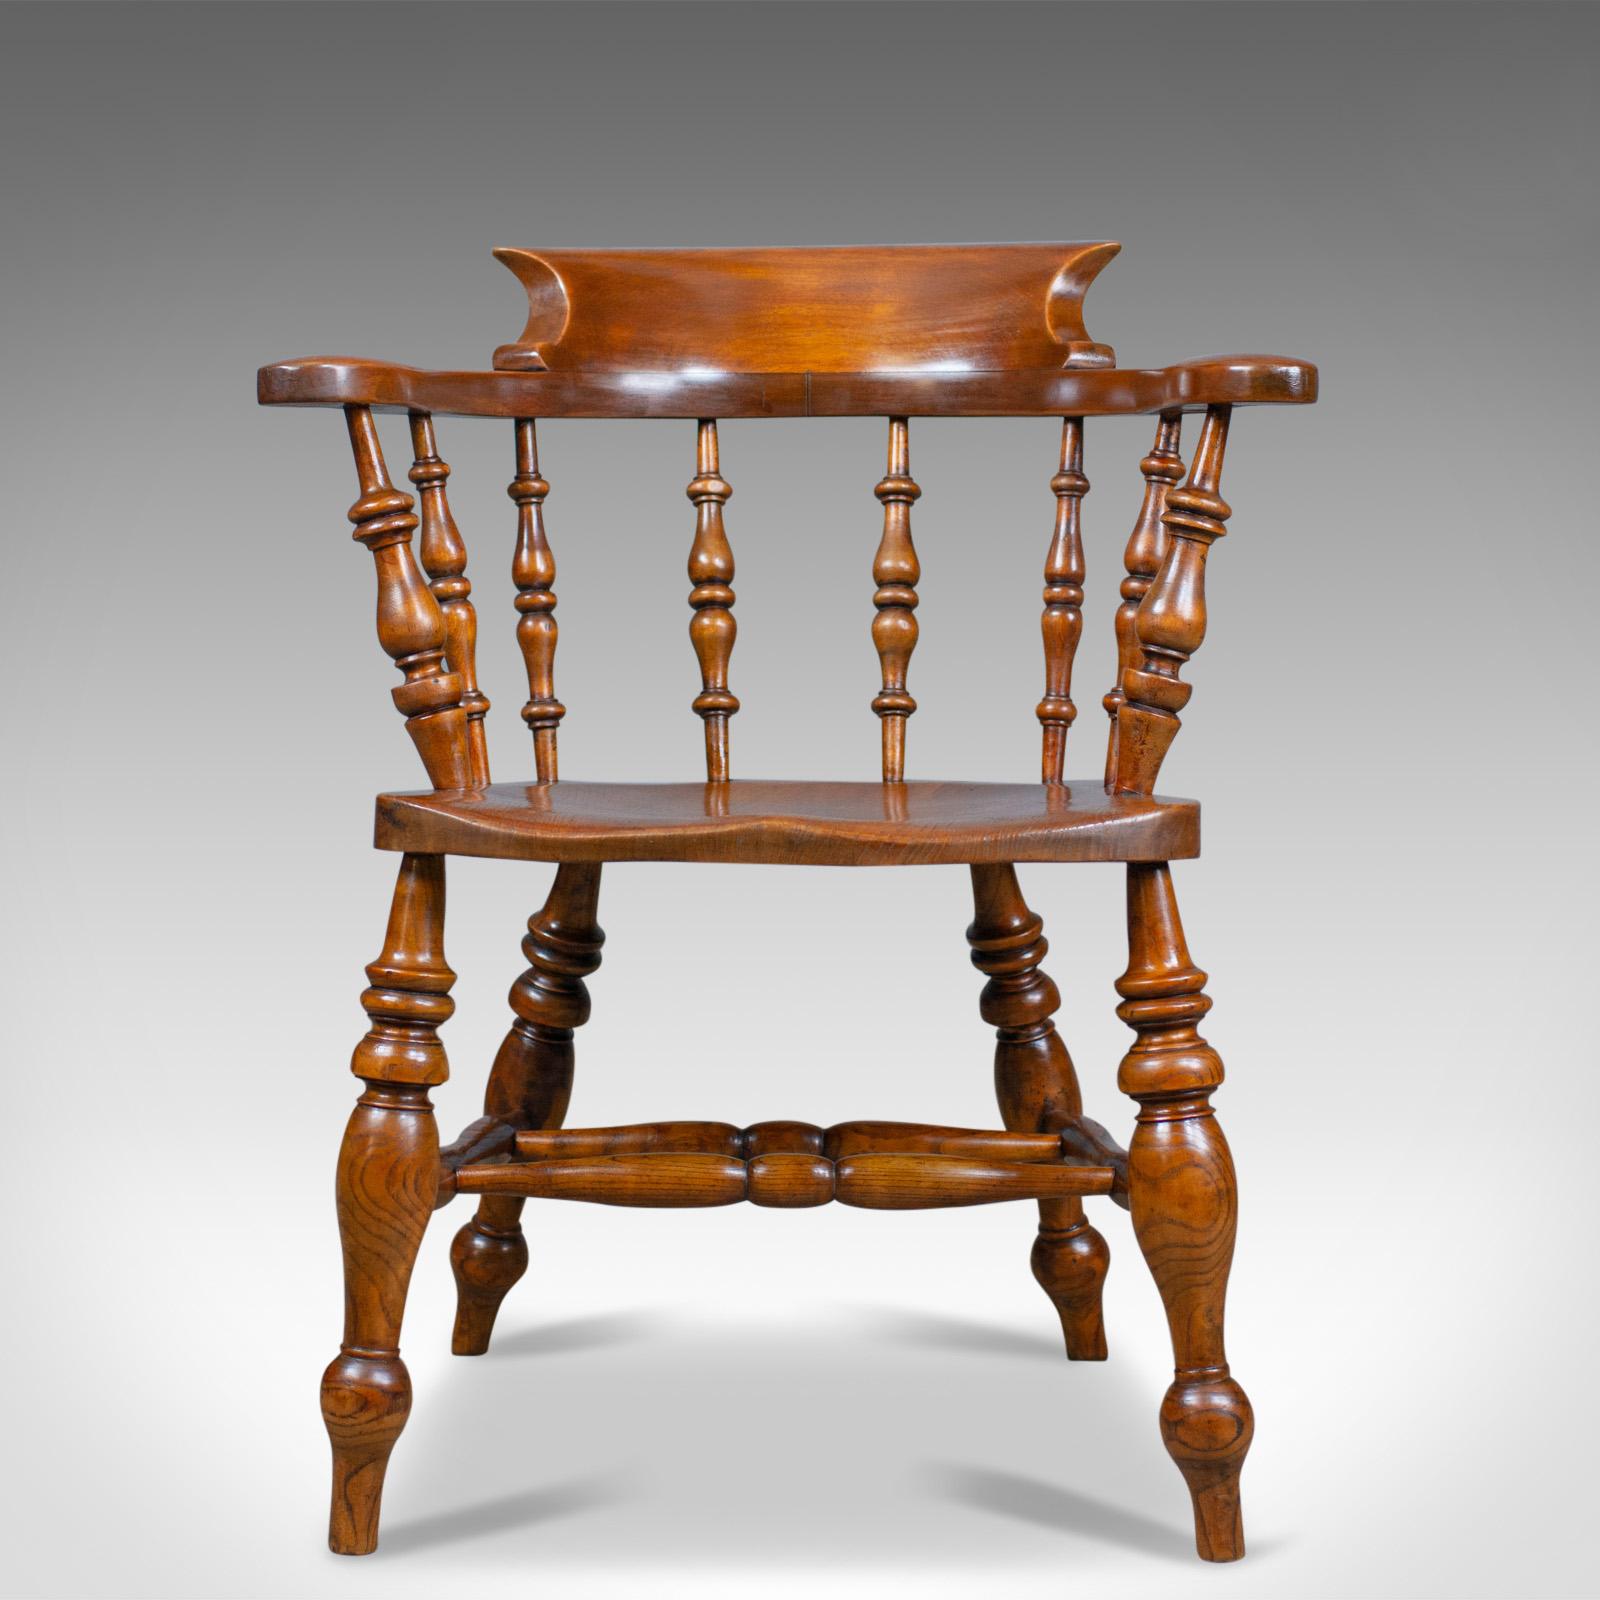 This is an antique elbow chair, an English, Victorian, elm, bow-back 'smokers', or 'captains' armchair dating to circa 1880.

An appealing country kitchen, bow back elbow chair
Grain interest to the elm and fruitwood in a wax polished